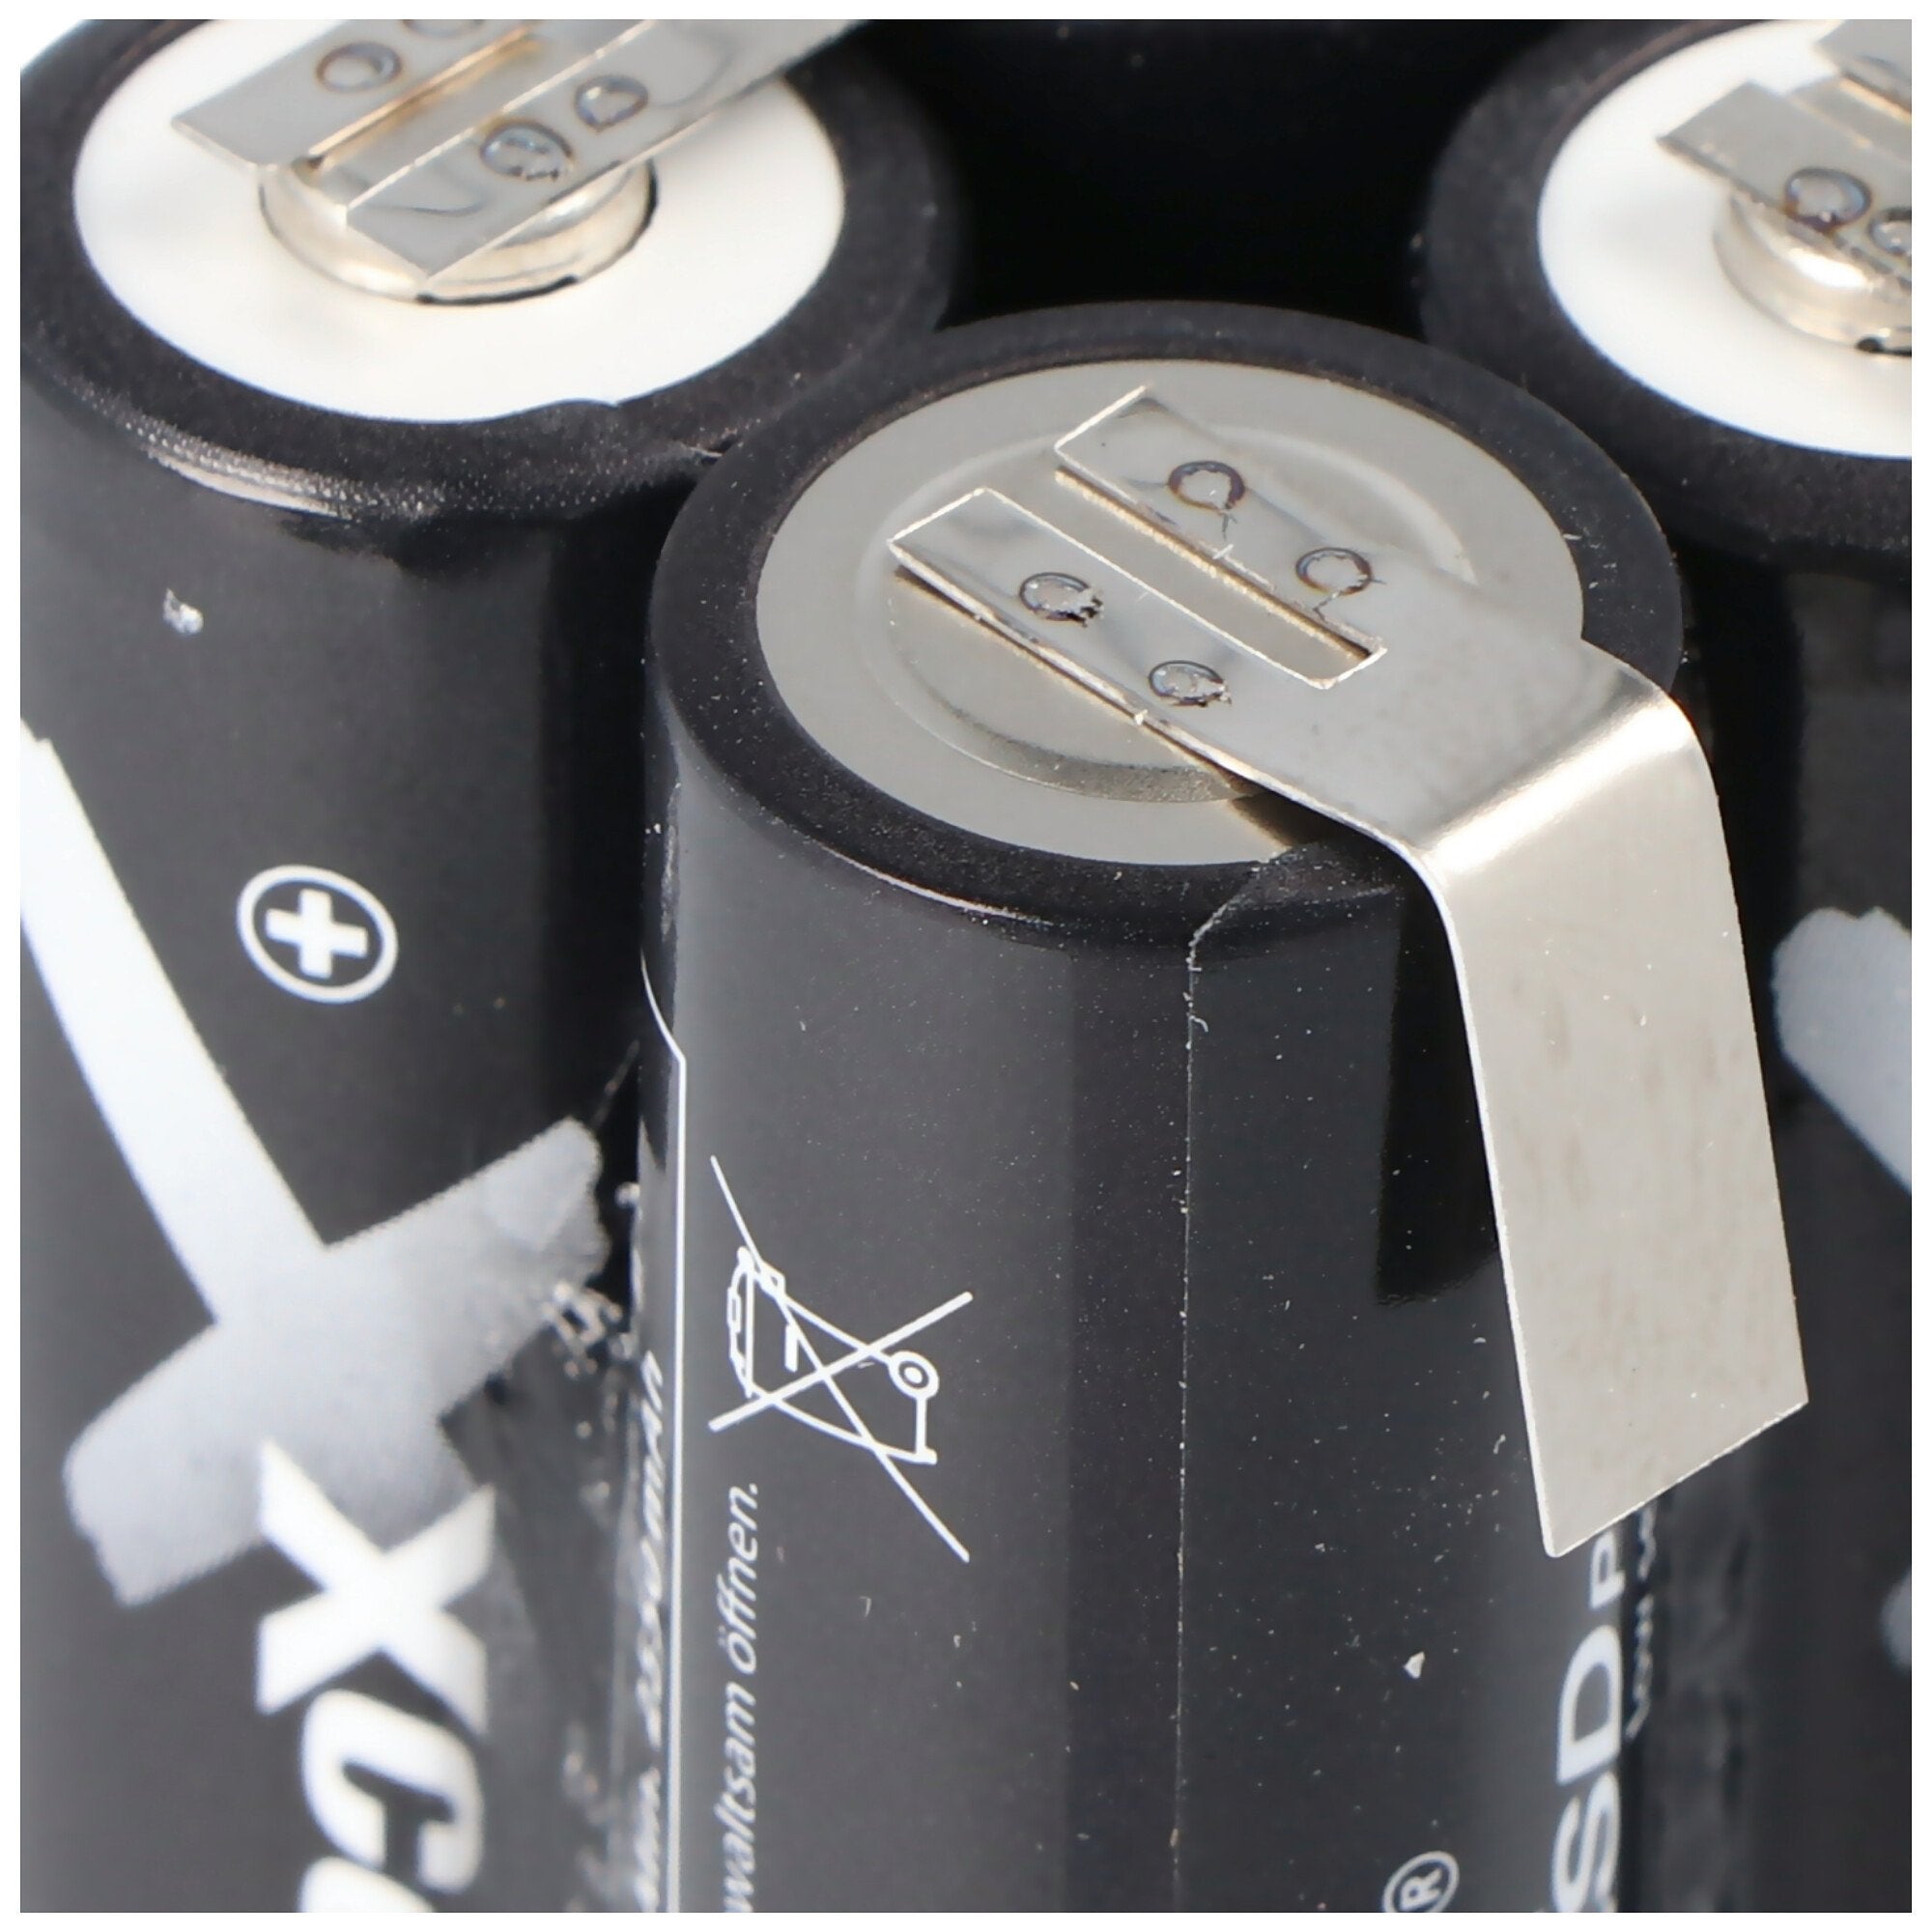 4 x APFT2100-1 4-cube Ni-MH Mignon AA battery pack 4.8 volts